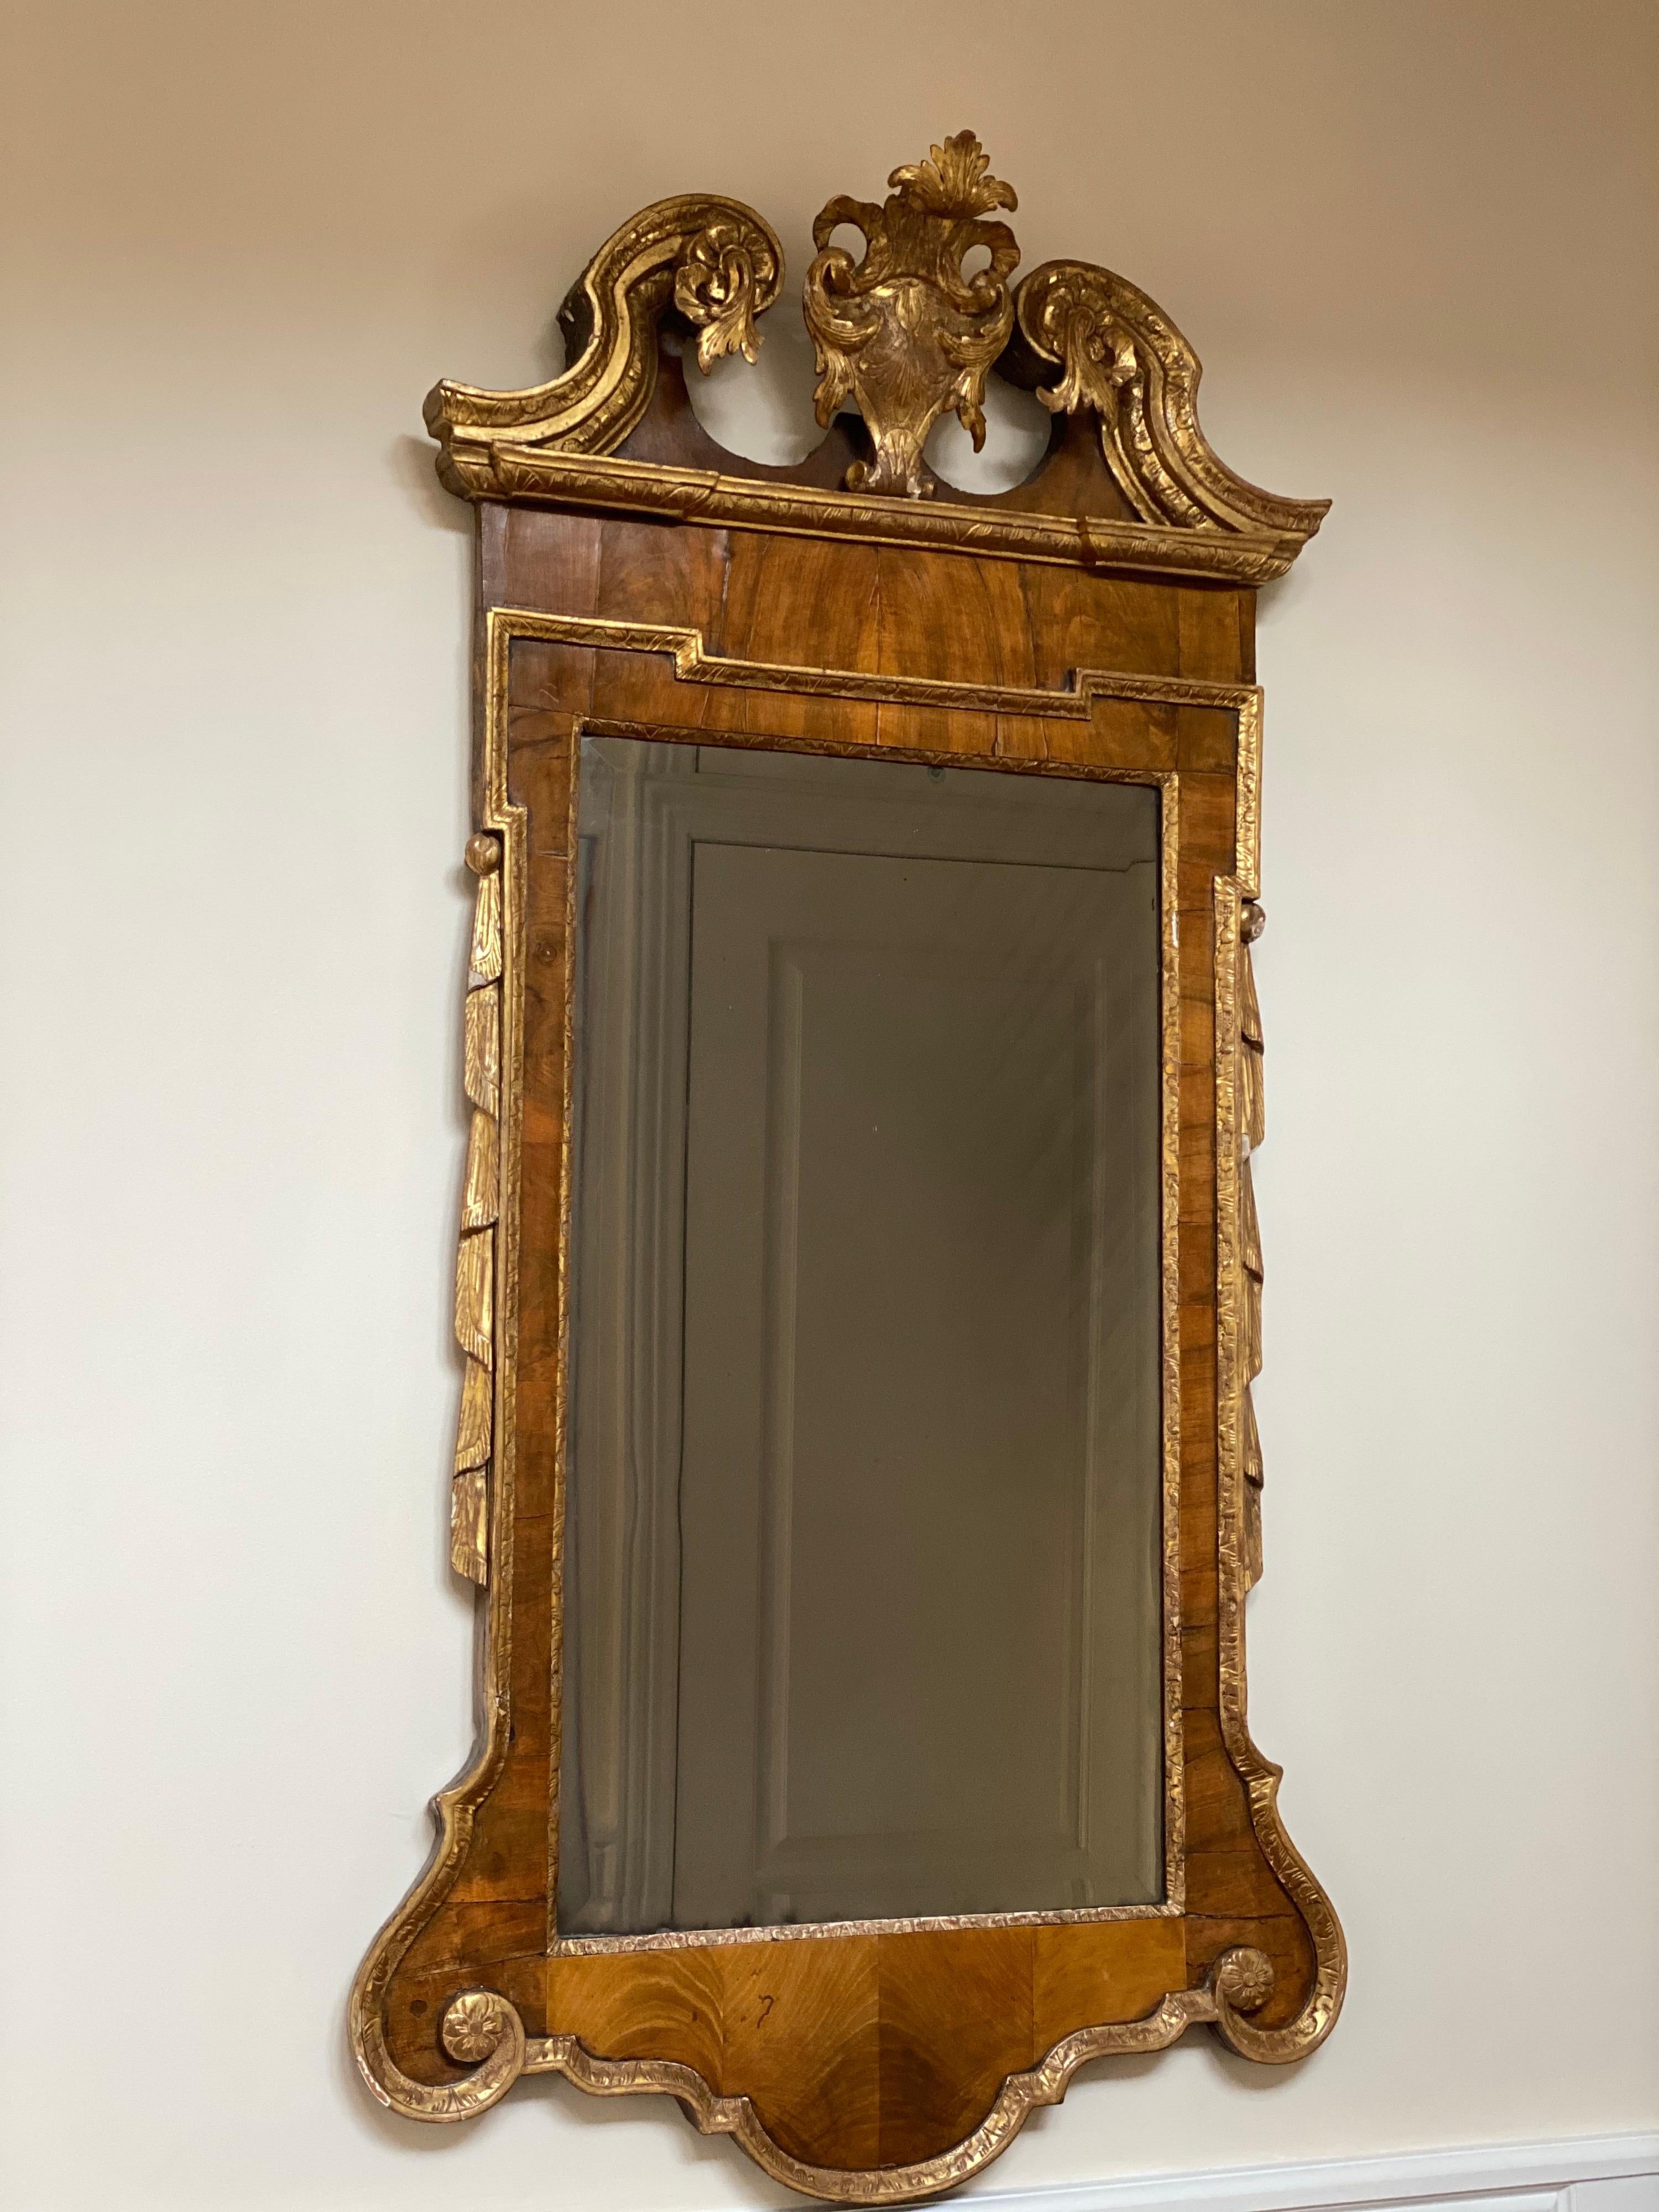 Federal Style Gilded Carved Wood Mirror, 19th Century 

Carved wood American Federal style parcel-gilt wall mirror featuring a broken scroll pediment, solid wood frame, nicely carved details, great style and form. 
May need to be crated to ship